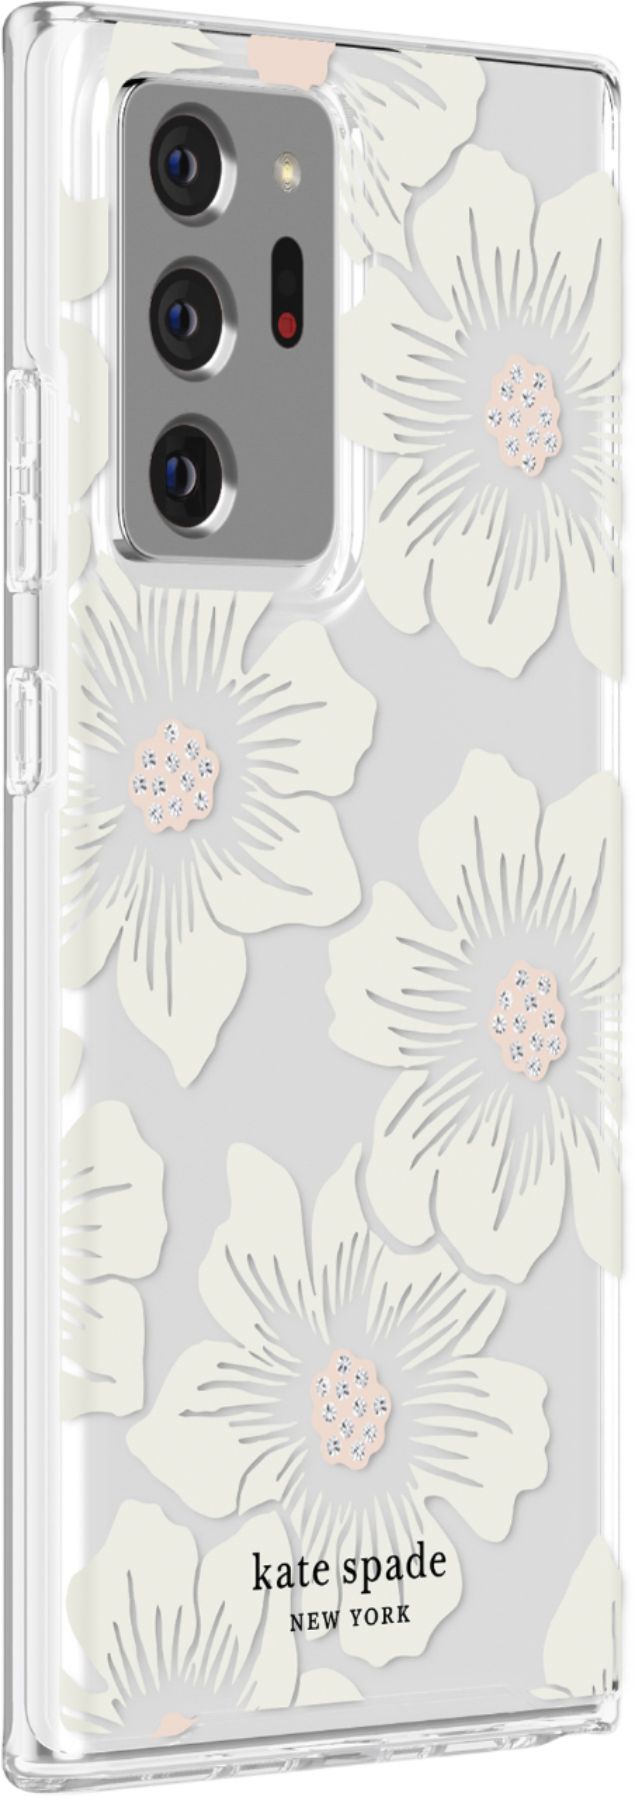 Angle View: kate spade new york - Protective Hardshell Case for Samsung Galaxy Note 20 Ultra - Hollyhock